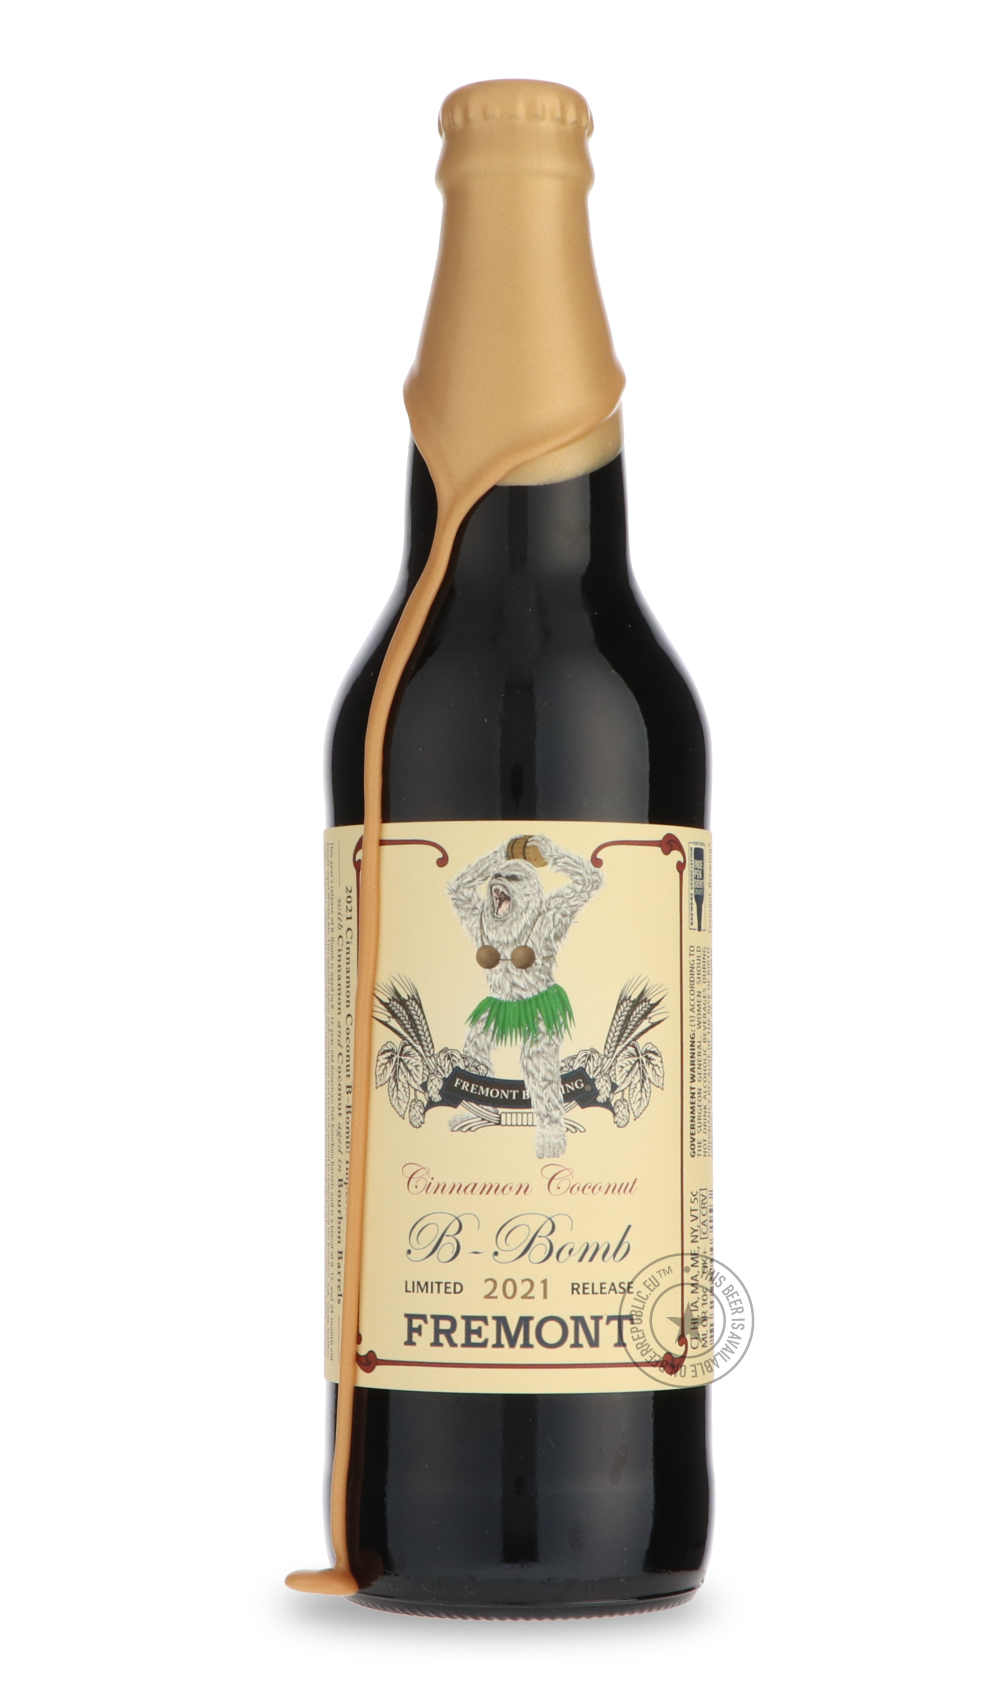 -Fremont- Cinnamon Coconut B-Bomb 2021-Brown & Dark- Only @ Beer Republic - The best online beer store for American & Canadian craft beer - Buy beer online from the USA and Canada - Bier online kopen - Amerikaans bier kopen - Craft beer store - Craft beer kopen - Amerikanisch bier kaufen - Bier online kaufen - Acheter biere online - IPA - Stout - Porter - New England IPA - Hazy IPA - Imperial Stout - Barrel Aged - Barrel Aged Imperial Stout - Brown - Dark beer - Blond - Blonde - Pilsner - Lager - Wheat - We